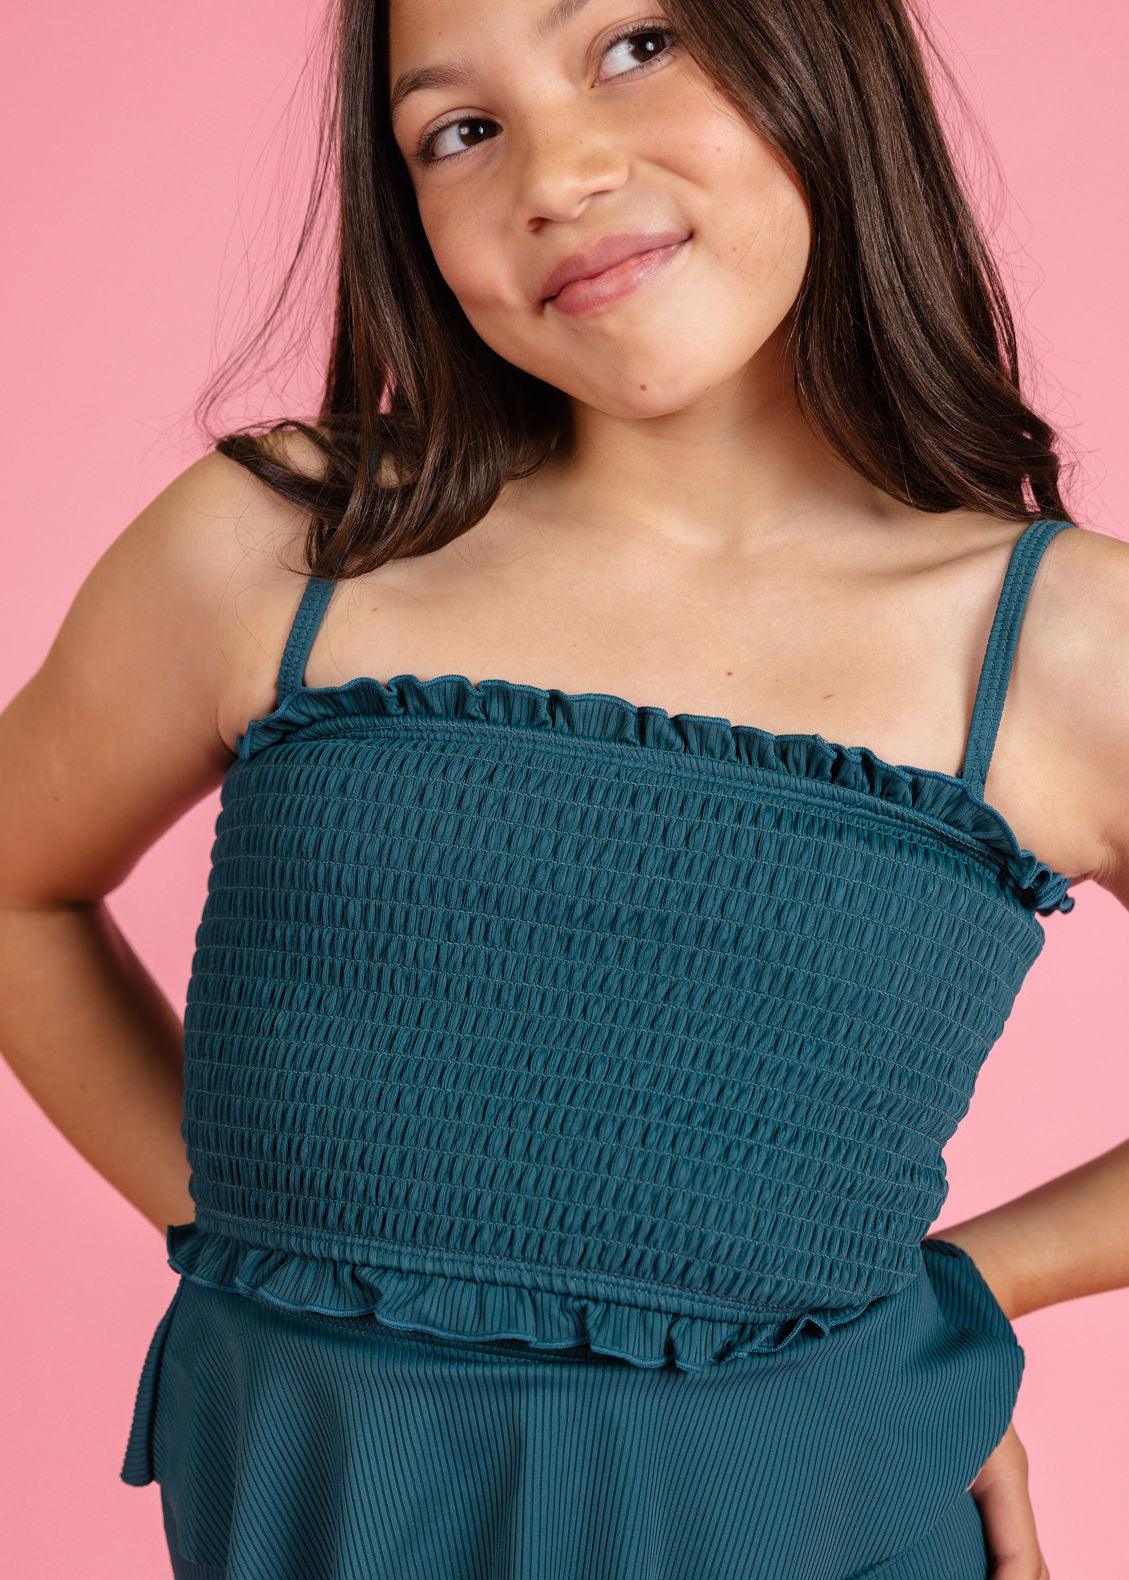 Teen Girl Crop Top Swimsuit - Ribbed Midnight Teal